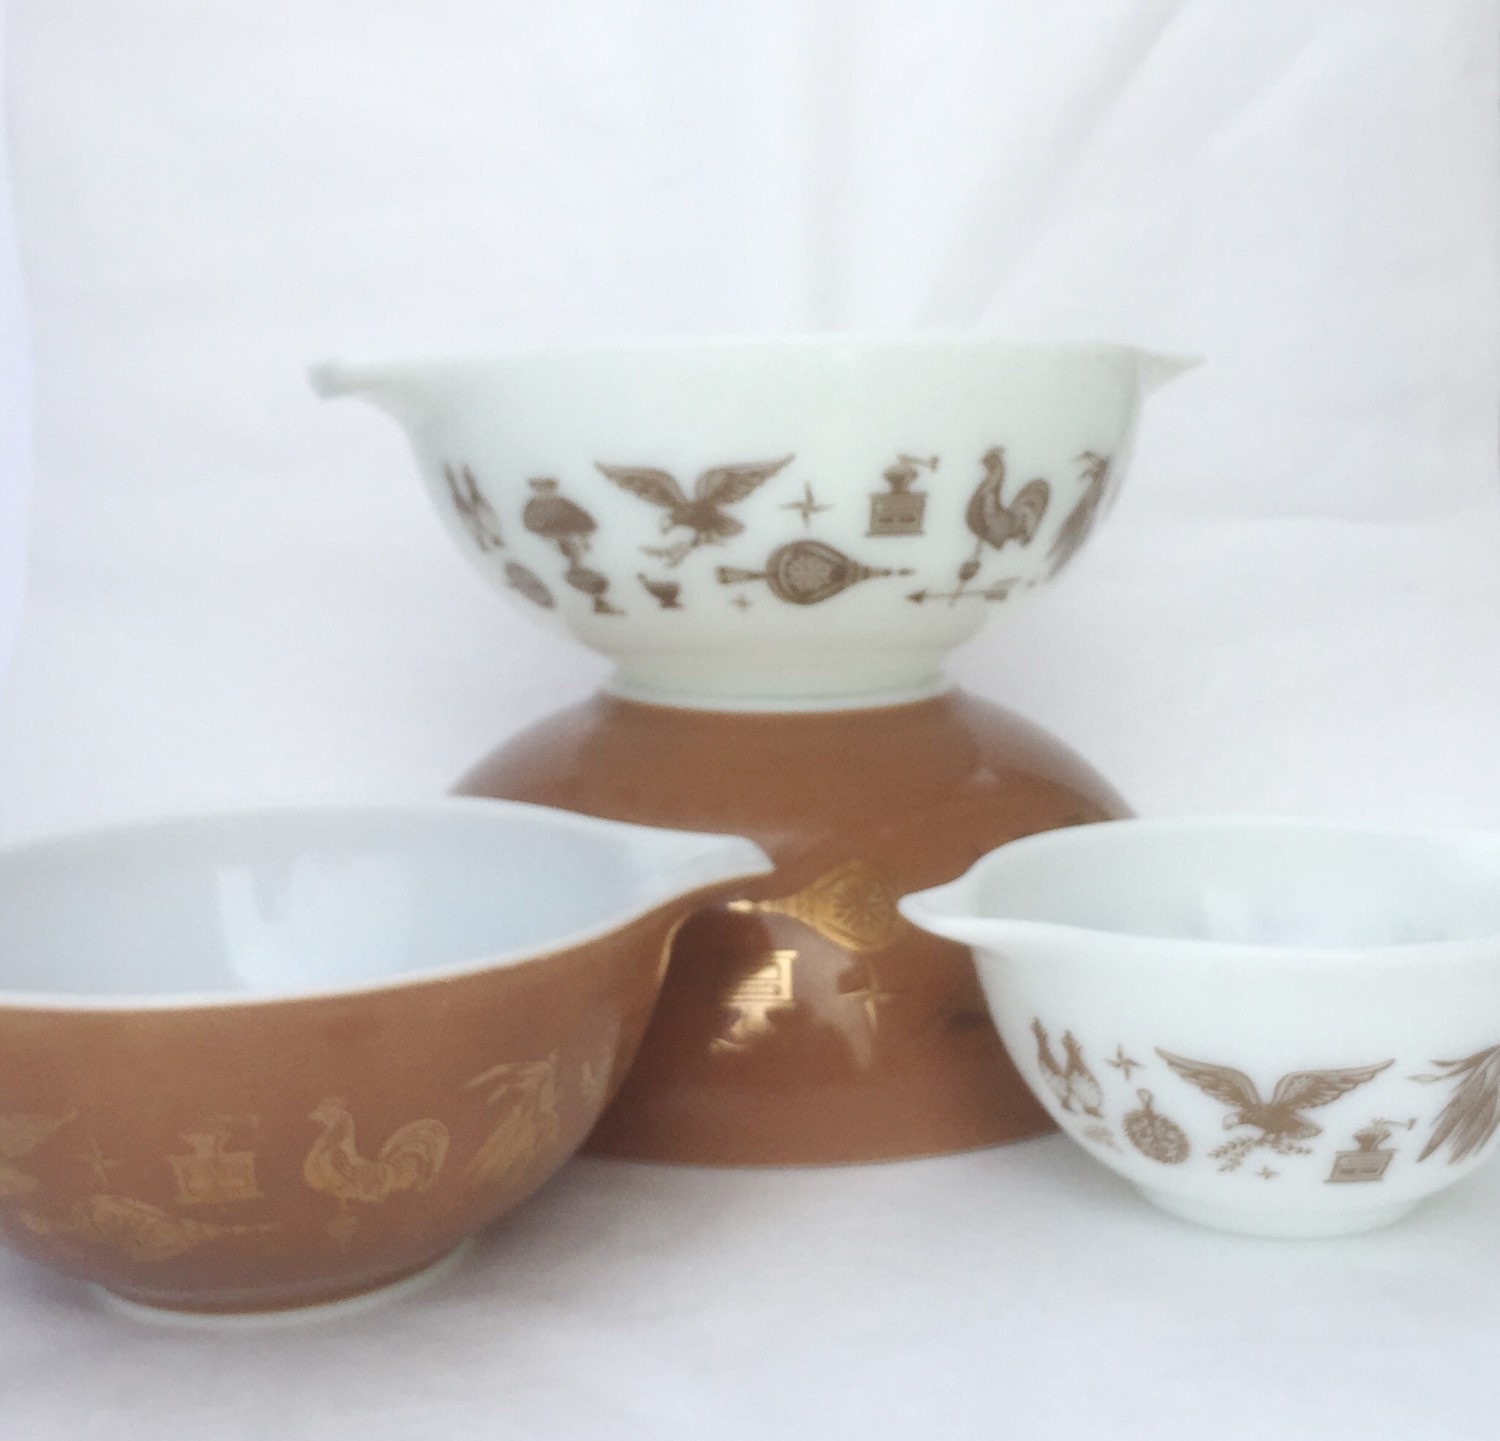 Early American Pyrex Cinderella Mixing Bowls: Set of Four in